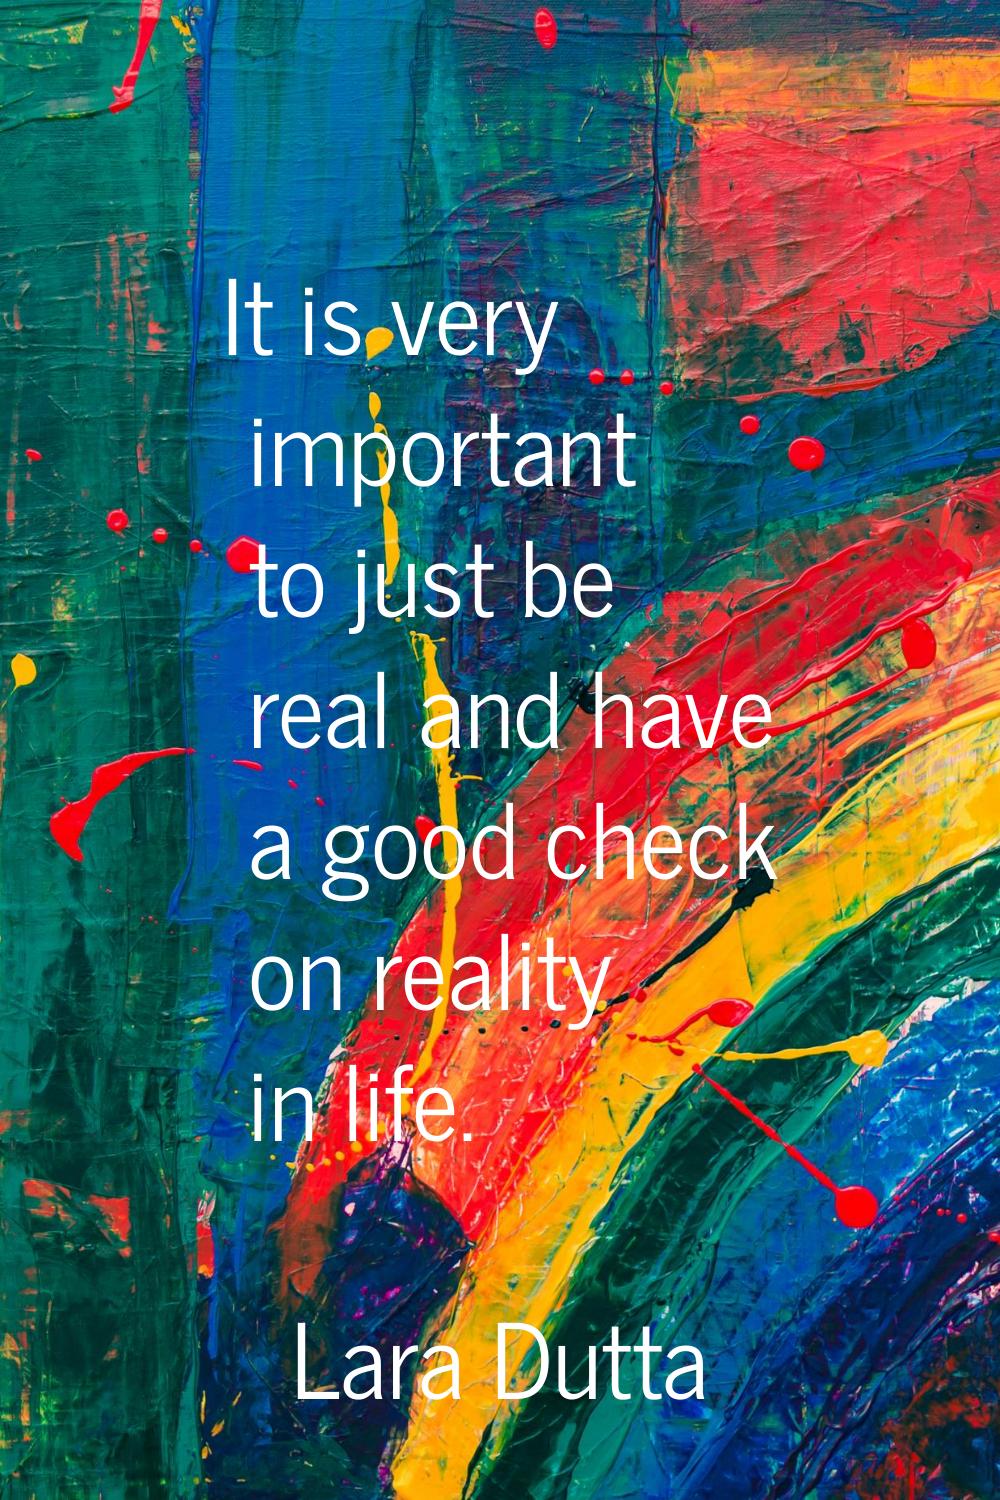 It is very important to just be real and have a good check on reality in life.